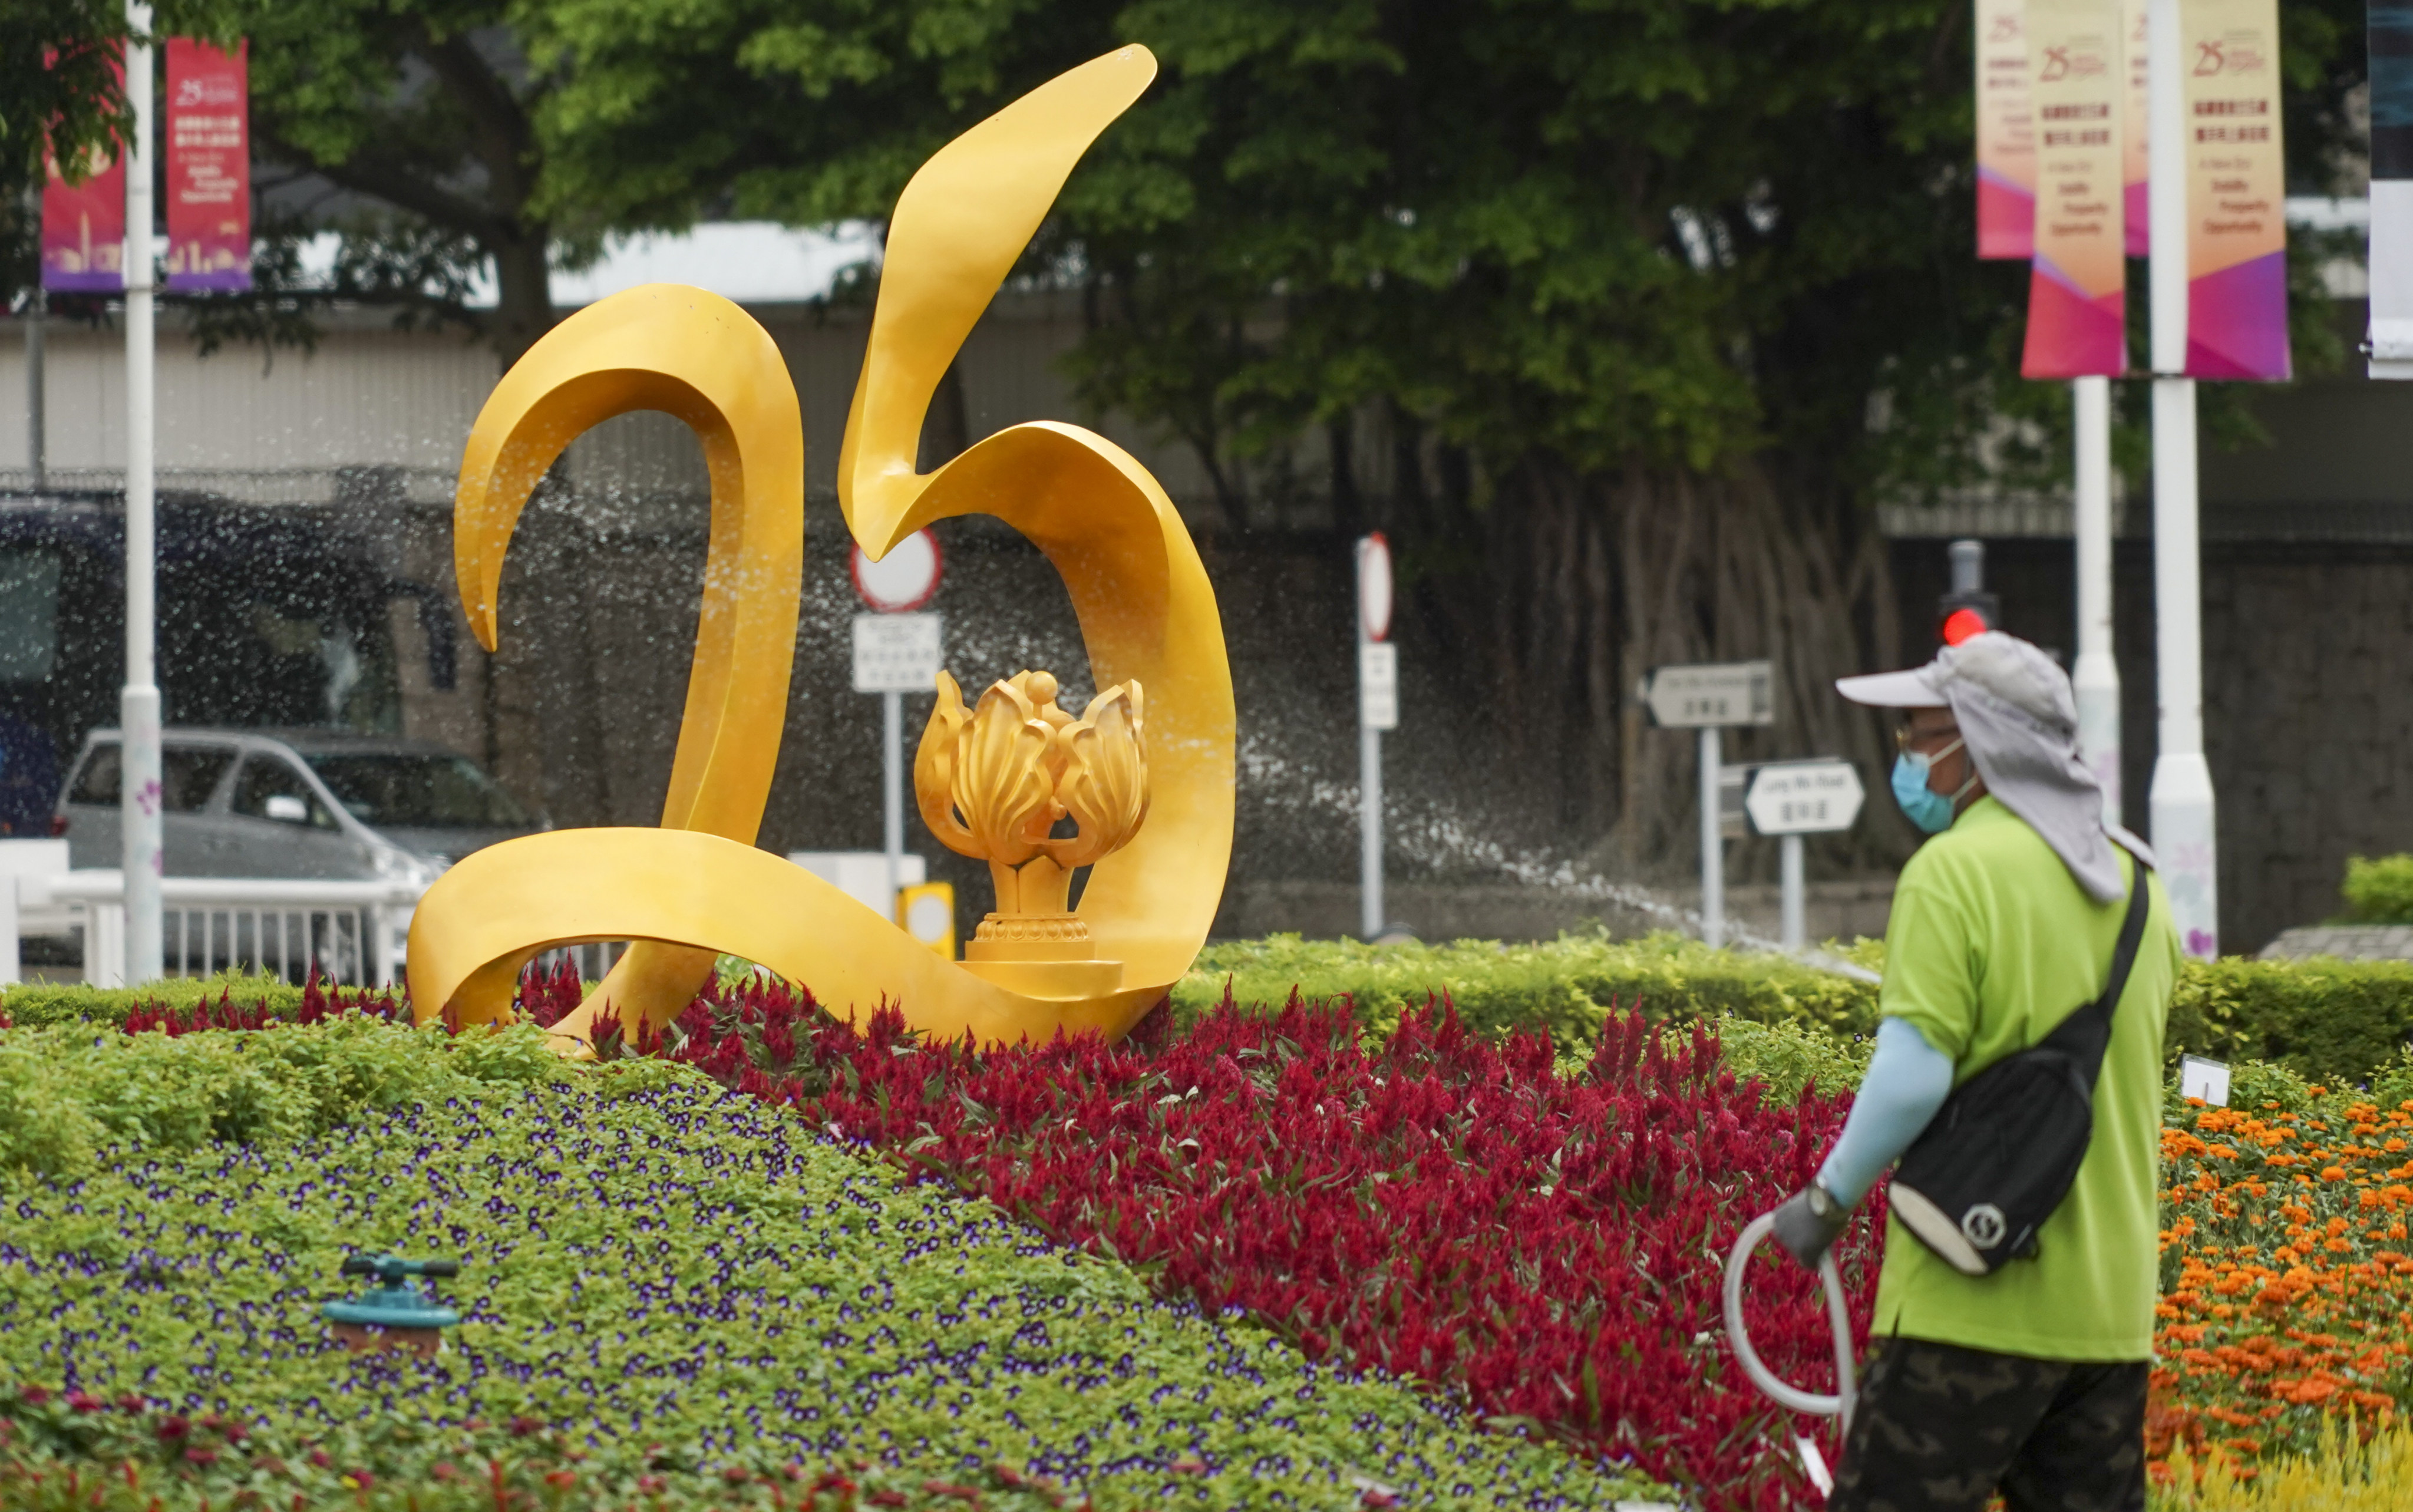 A worker waters plants at a new installation at Tamar Park, “Art@Harbour”, to celebrate the 25th anniversary of the establishment of the Hong Kong special administrative region. Photo: Felix Wong